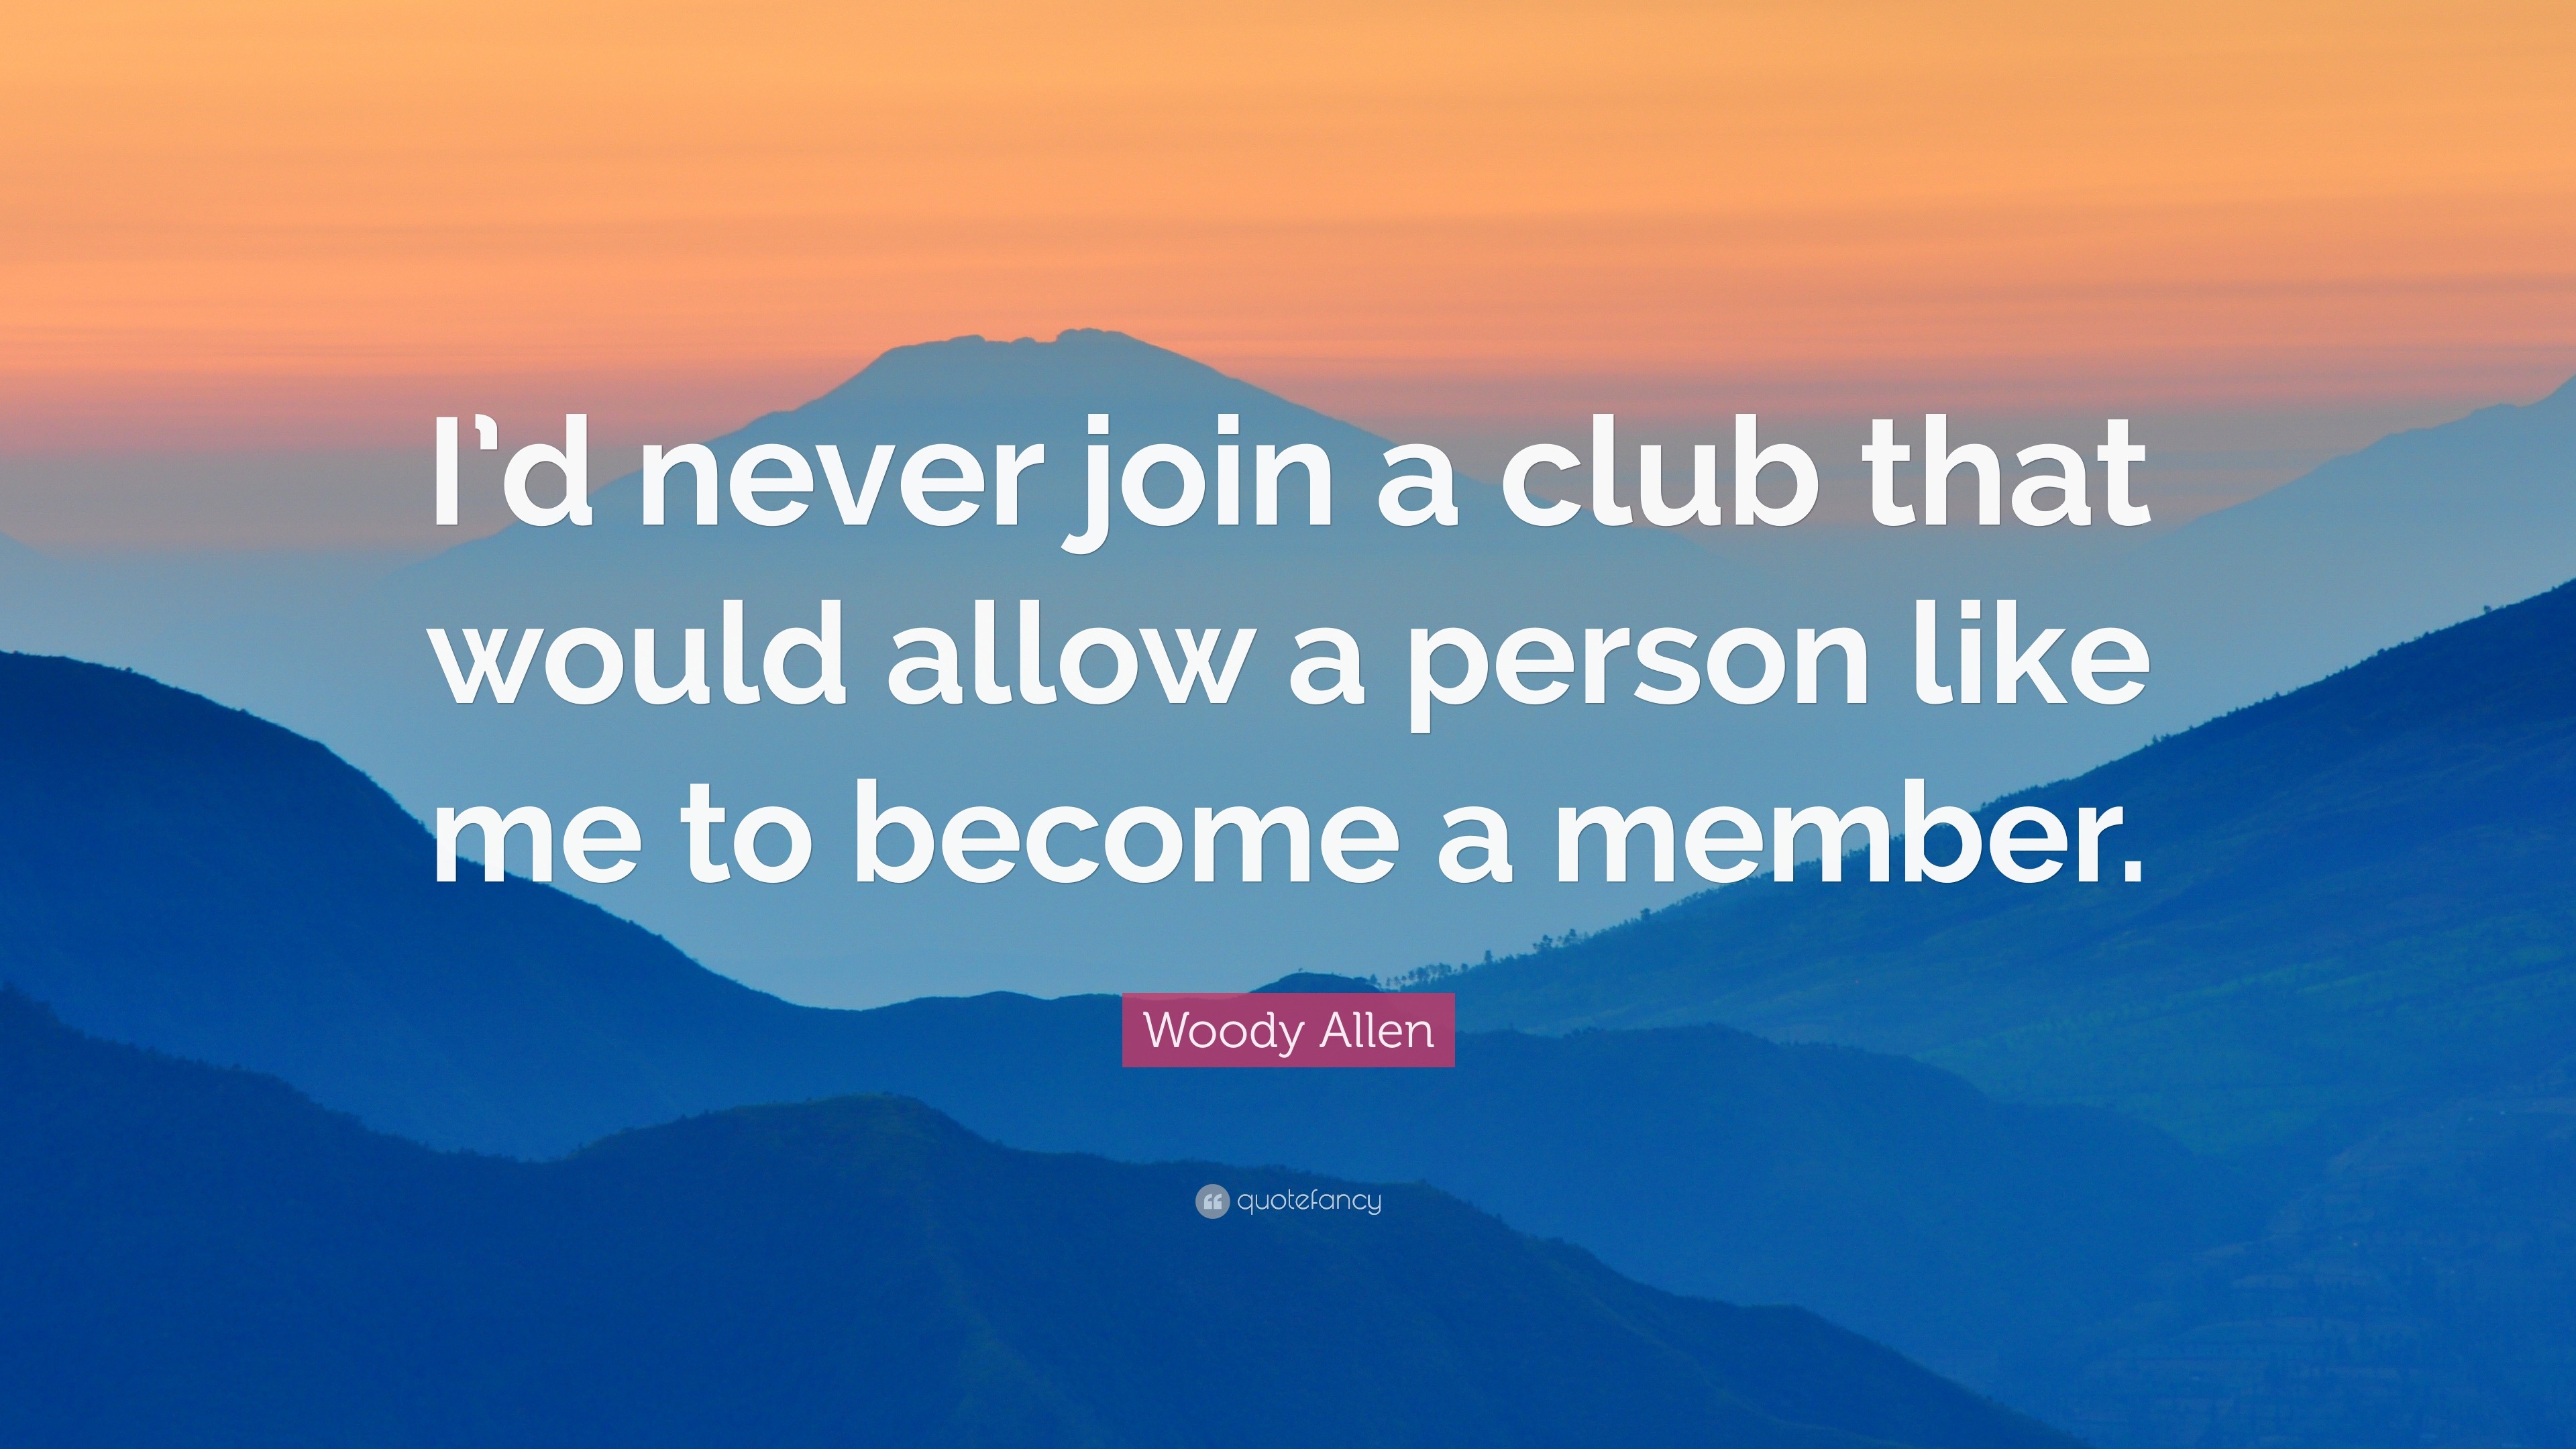 Woody Allen Quote: “I'd never join a club that would allow a person like me